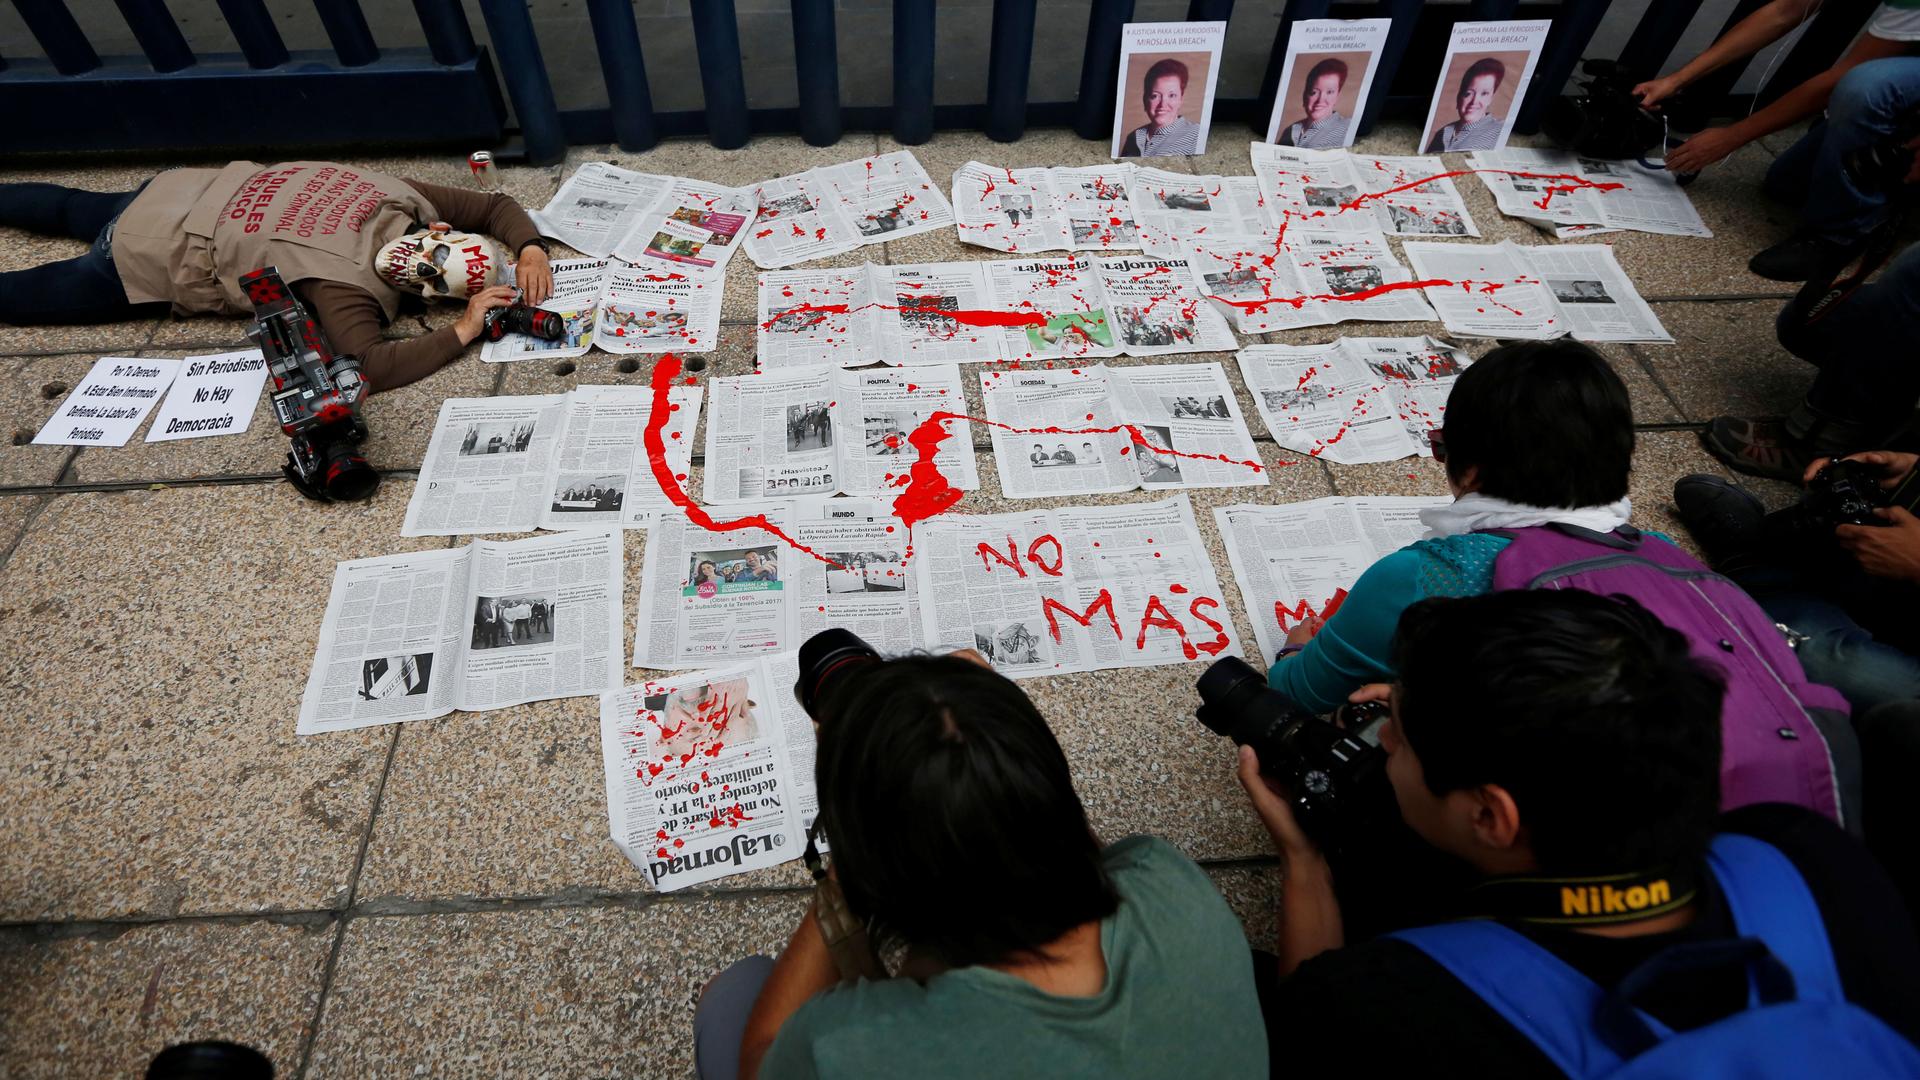 Photographers are huddled around a protest on the sidewalk. There are newspapers laid out on the sidewalk, drizzled in red paint to look like blood, while a person wearing a skull mask pretends to lay dead next to them. The words "No mas" are written.